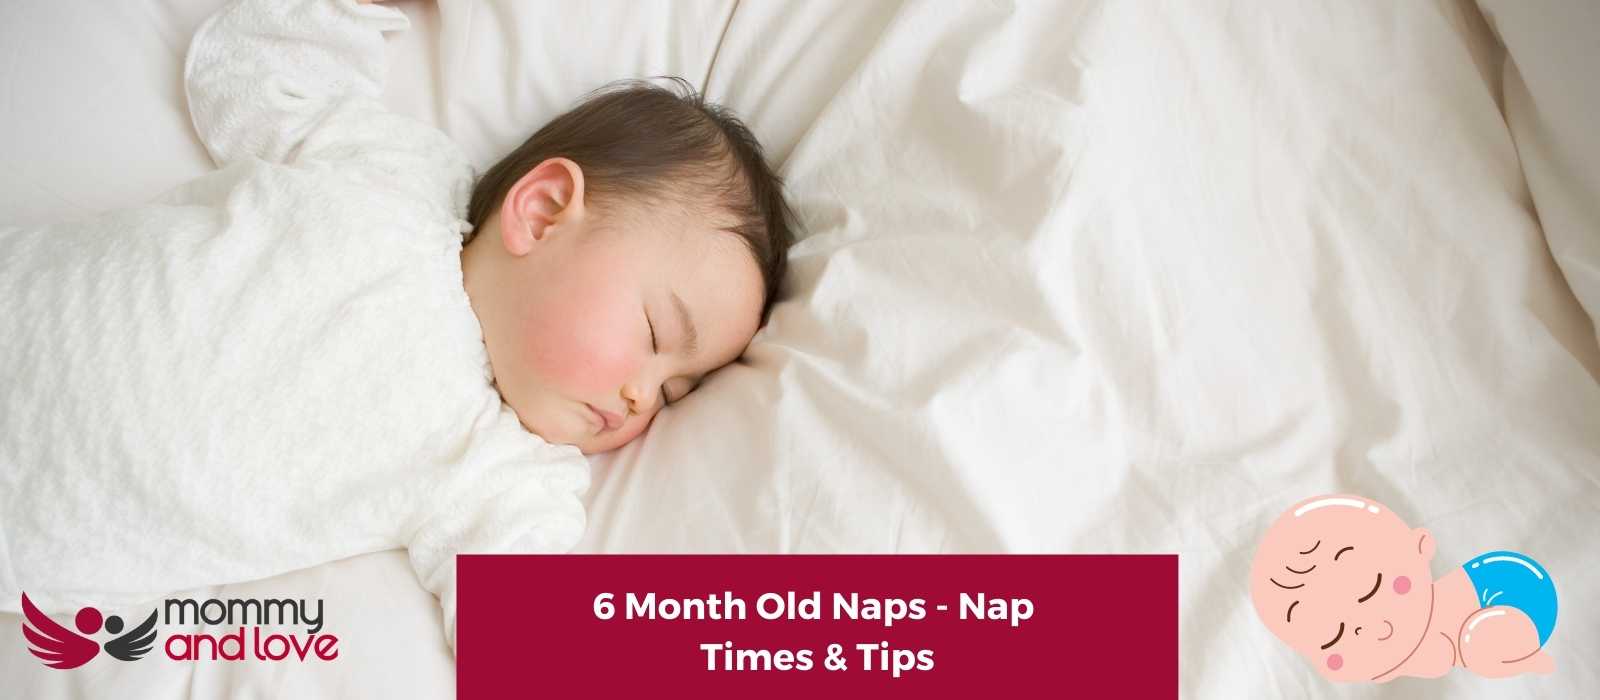 6 Month Old Naps - Nap Times & Tips